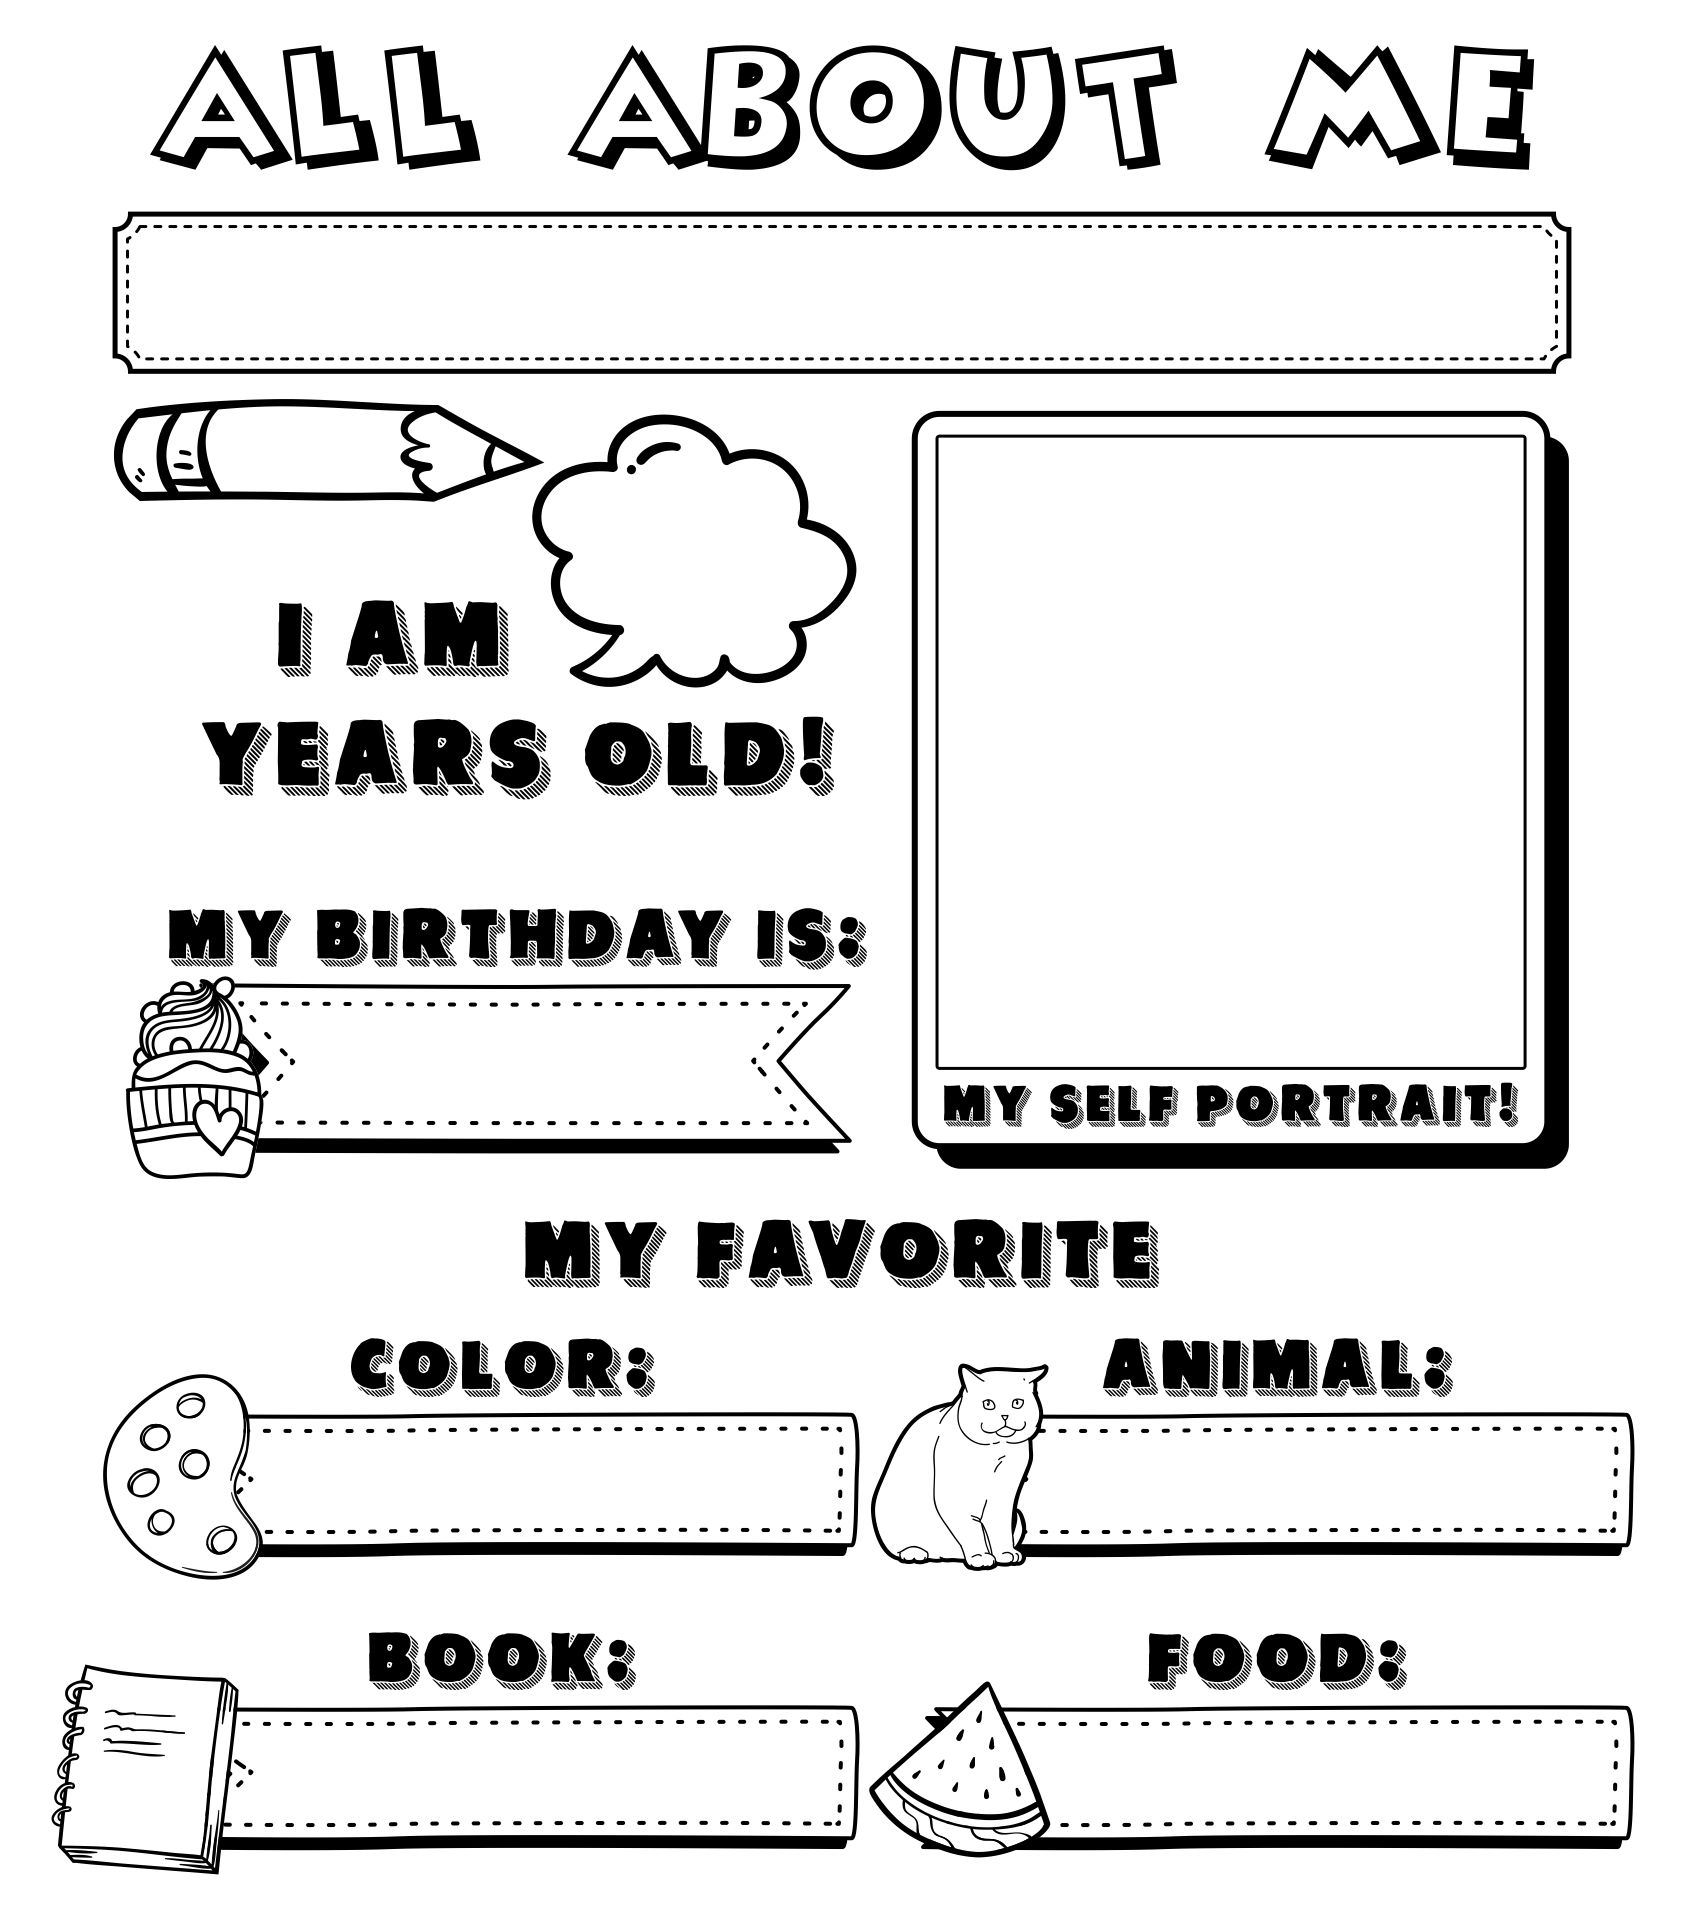 Printable All About Me Poster For A Preschool Theme